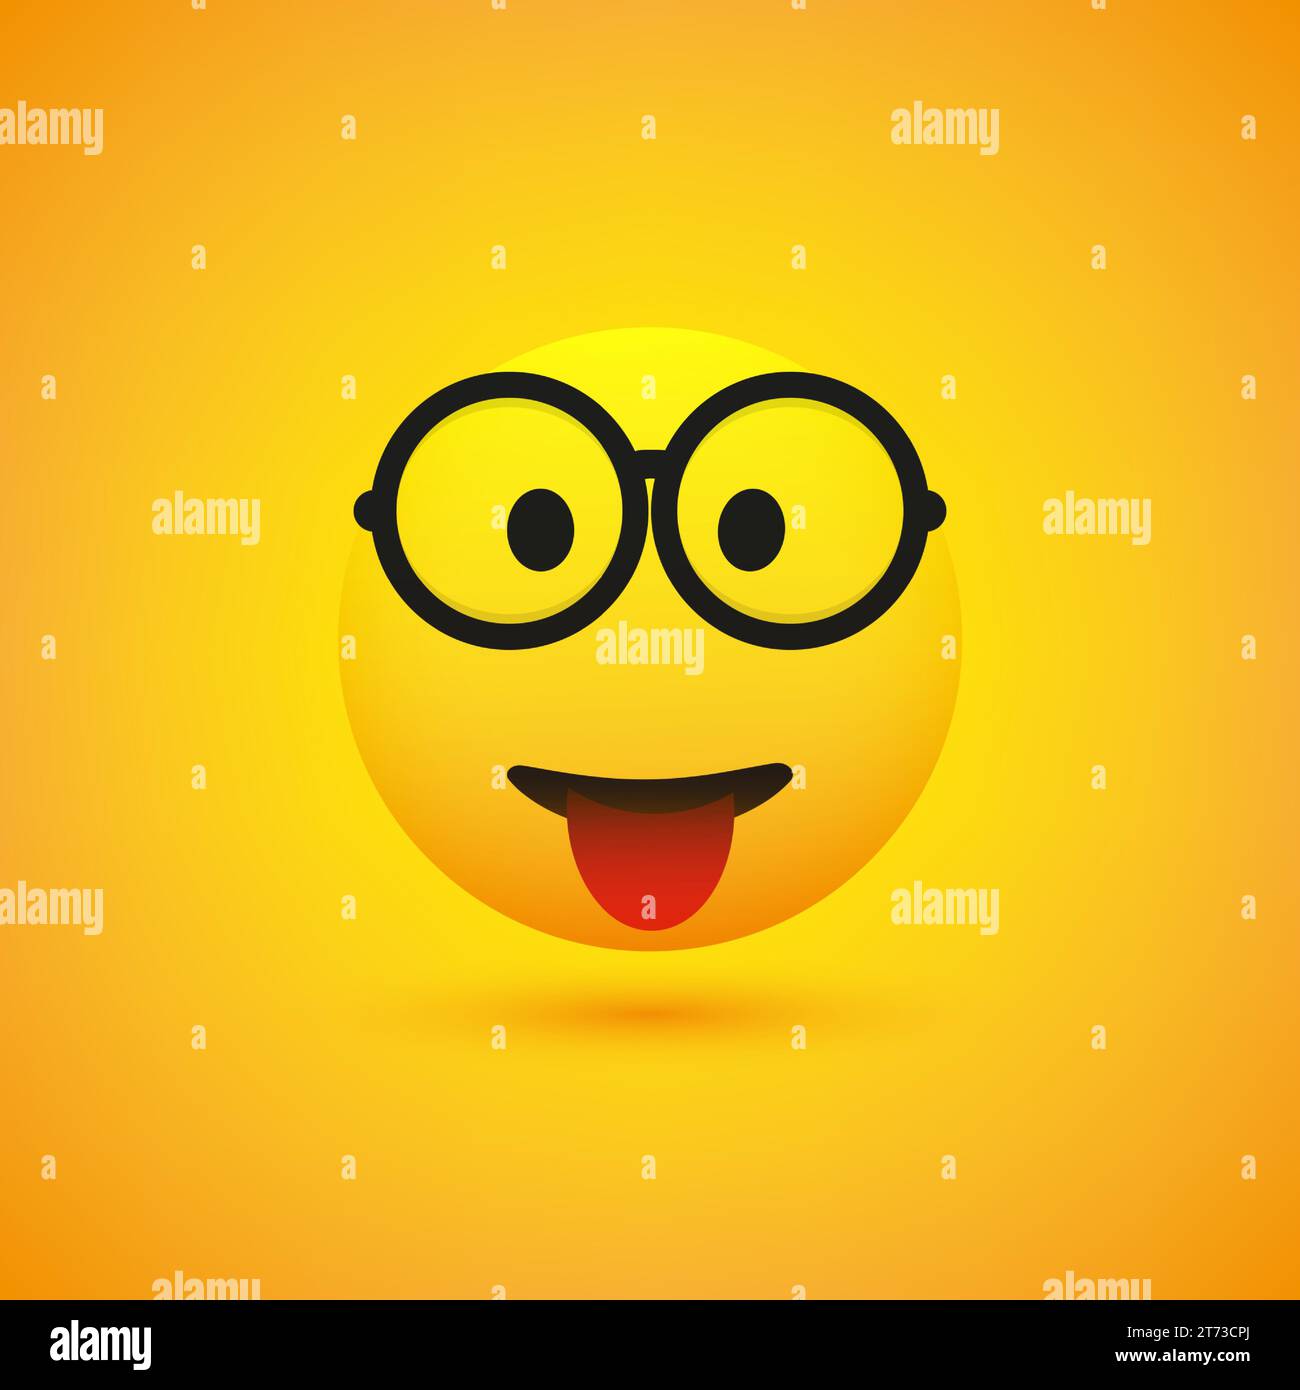 Smiling Emoji with Glasses and Stuck Out Tongue - Simple Happy Emoticon on Yellow Background - Vector Design Stock Vector